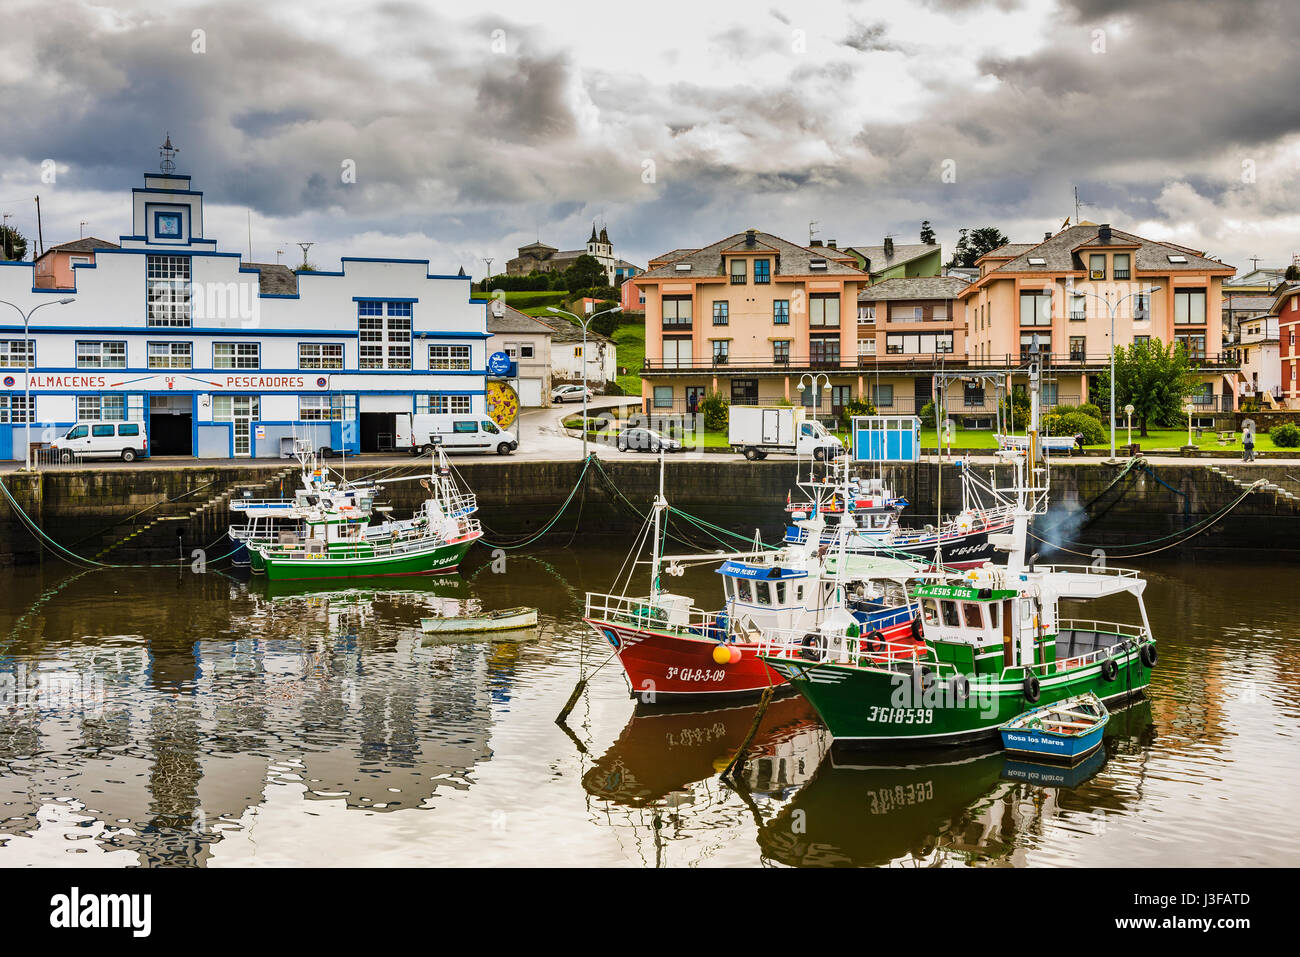 Puerto de Vega is one of eight parishes, administrative divisions, in Navia, a municipality within the province and autonomous community of Principali Stock Photo